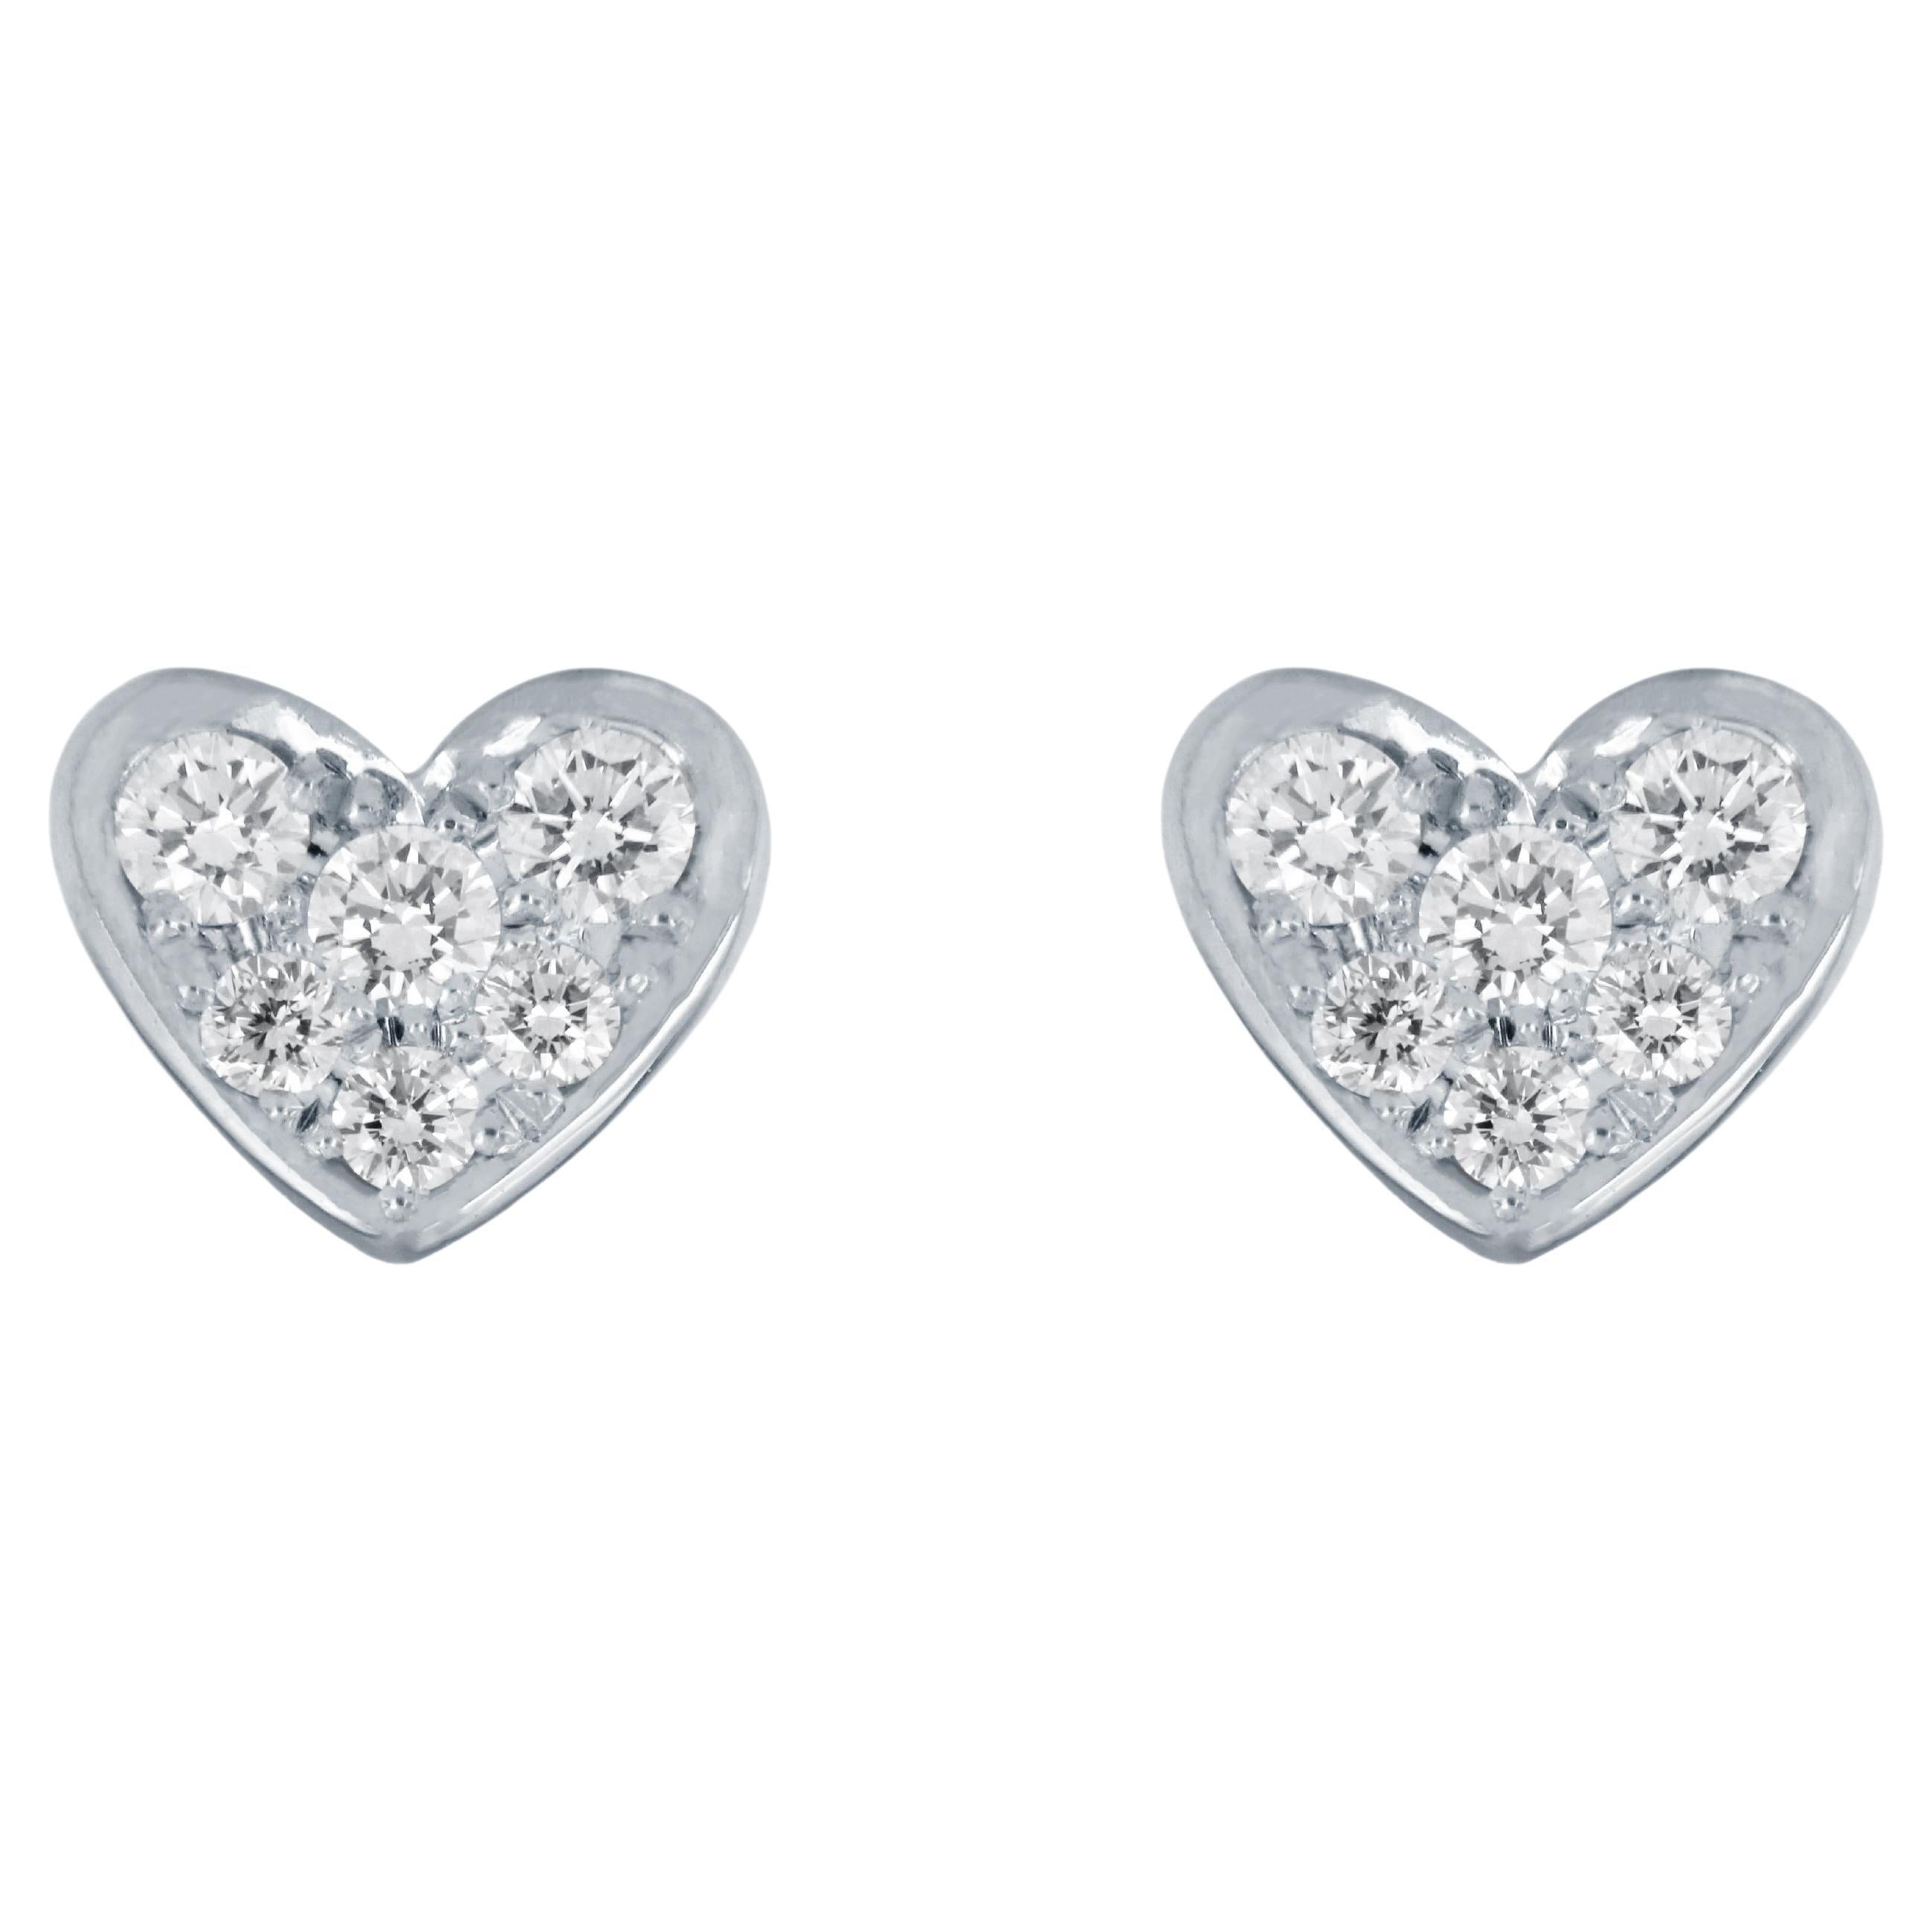 Tiffany & Co. Sentimental Heart White Gold Earrings with Diamonds For Sale